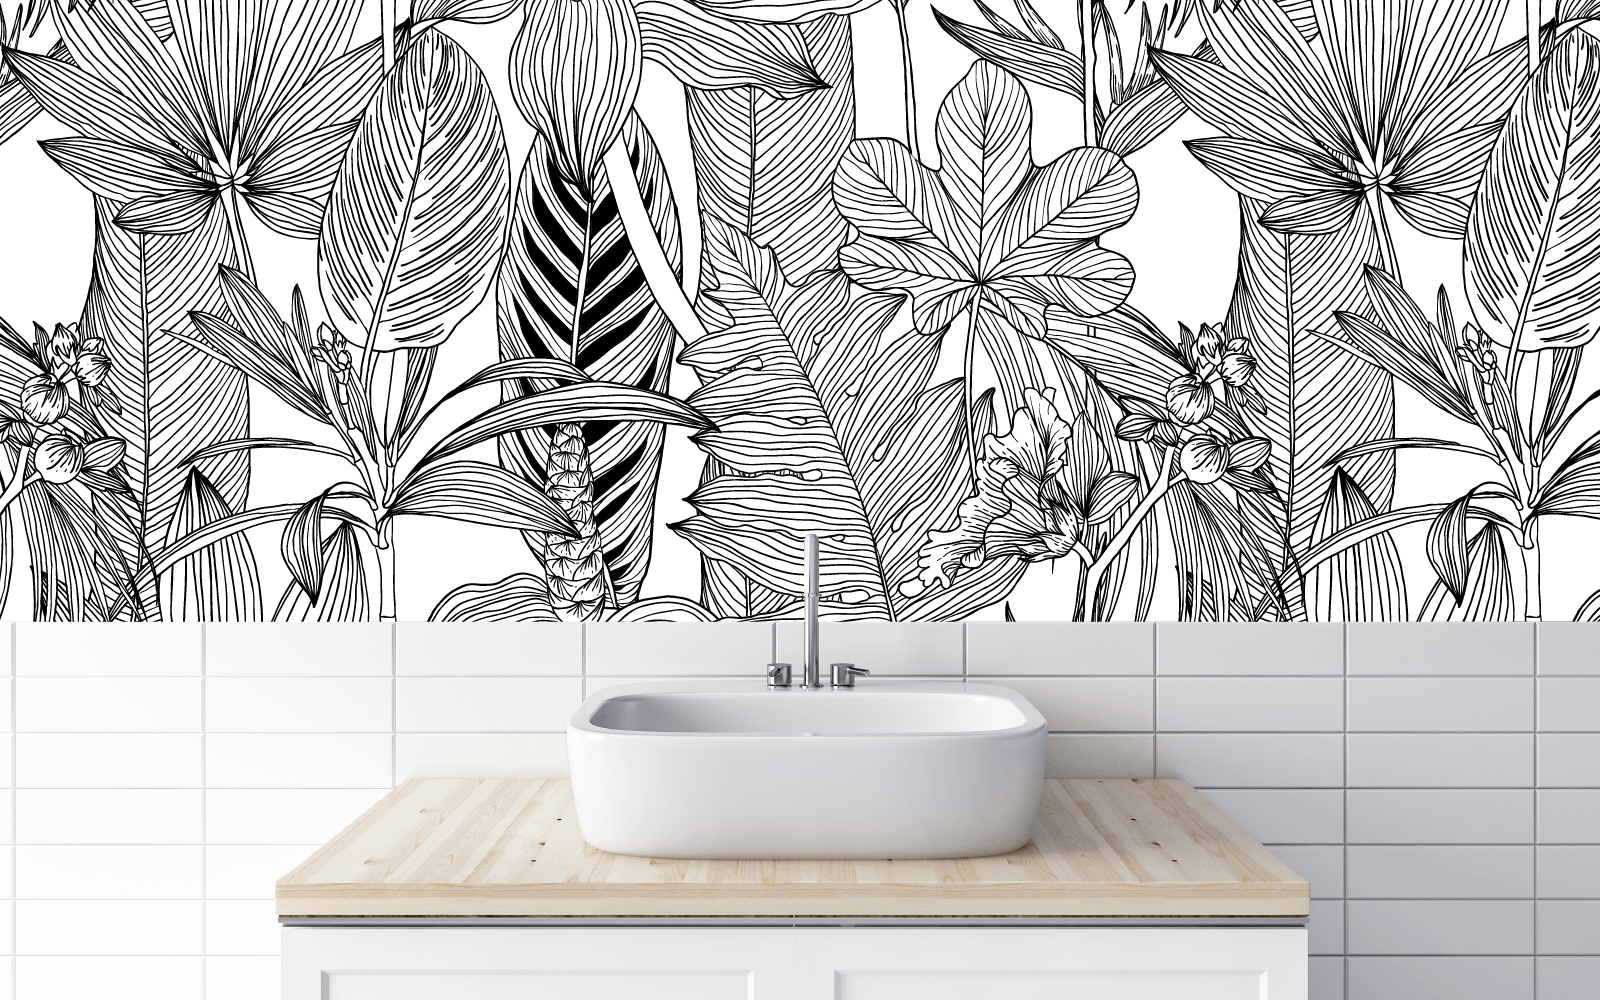 Modern, though classic; the line drawings of this indoor garden evoke the sketches and engravings of the naturalists first endeavouring to categorize and document flora in the wild. 